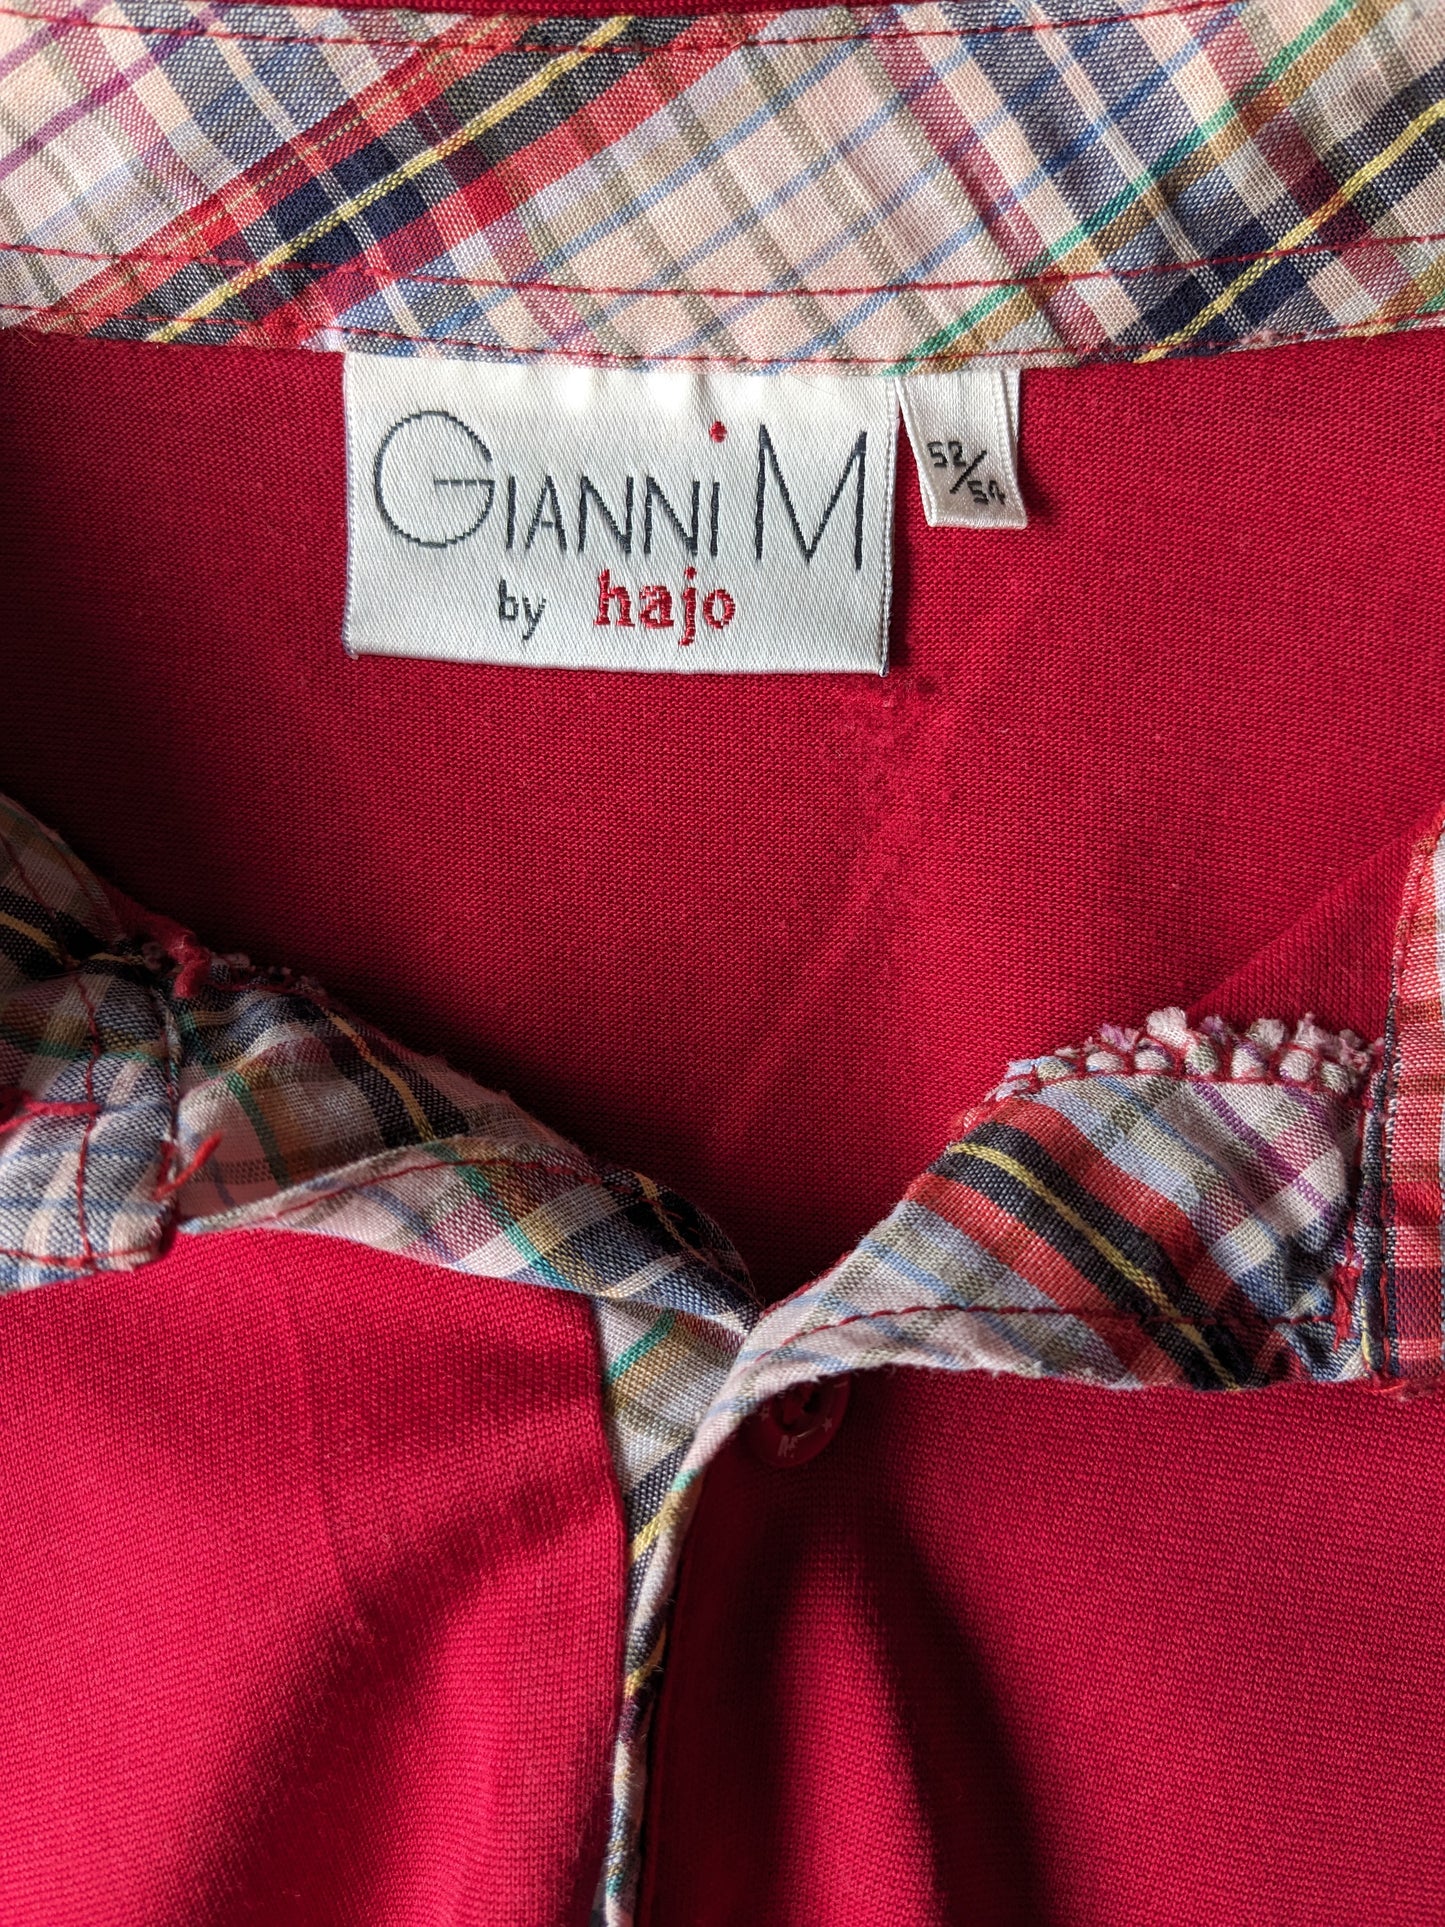 Gianni M by Hajo Vintage Polo with elastic band. Colored red. Size L / XL.